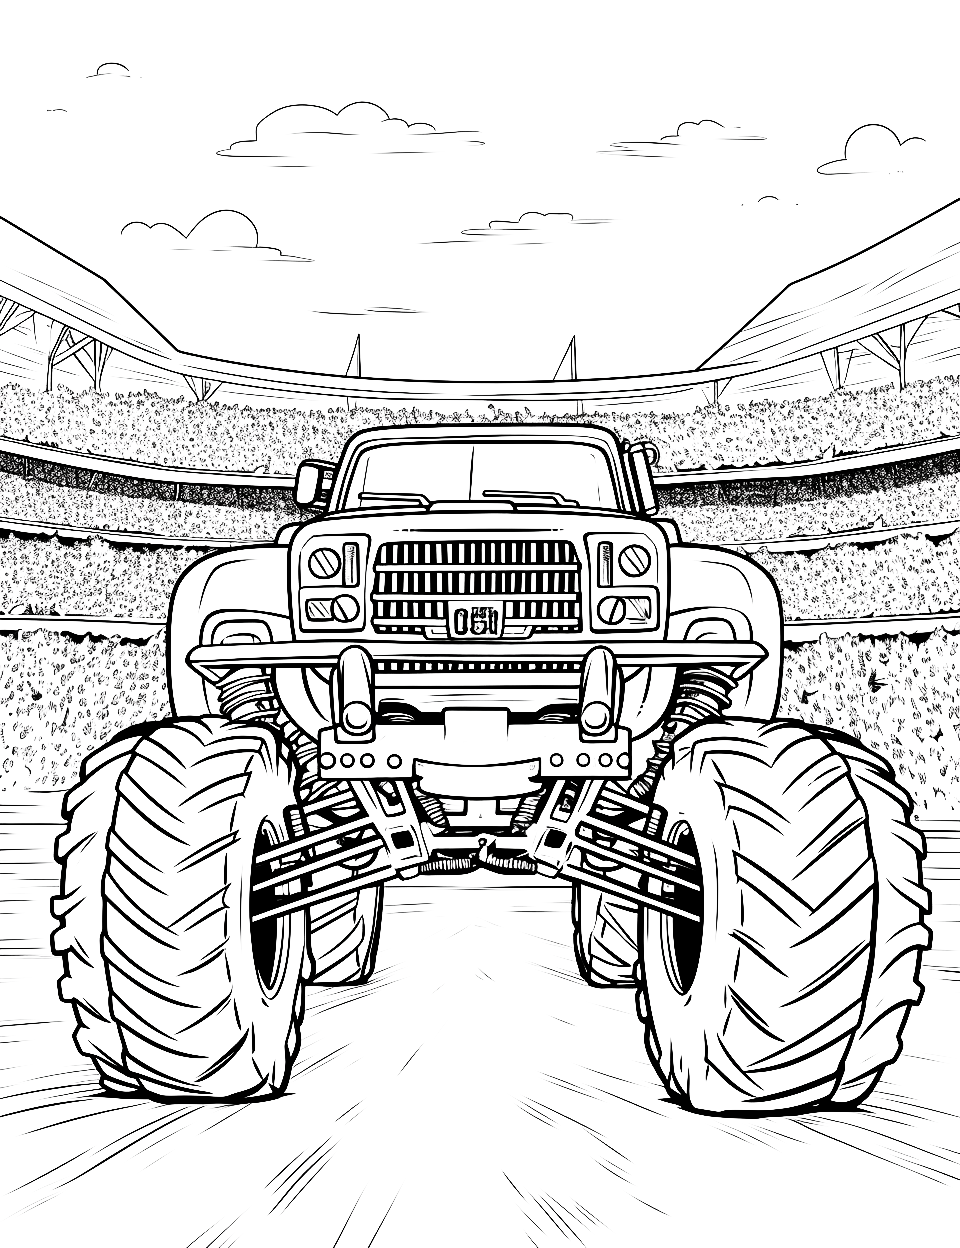 Monster Jam Madness Truck Coloring Page - A large arena with a roaring monster truck.